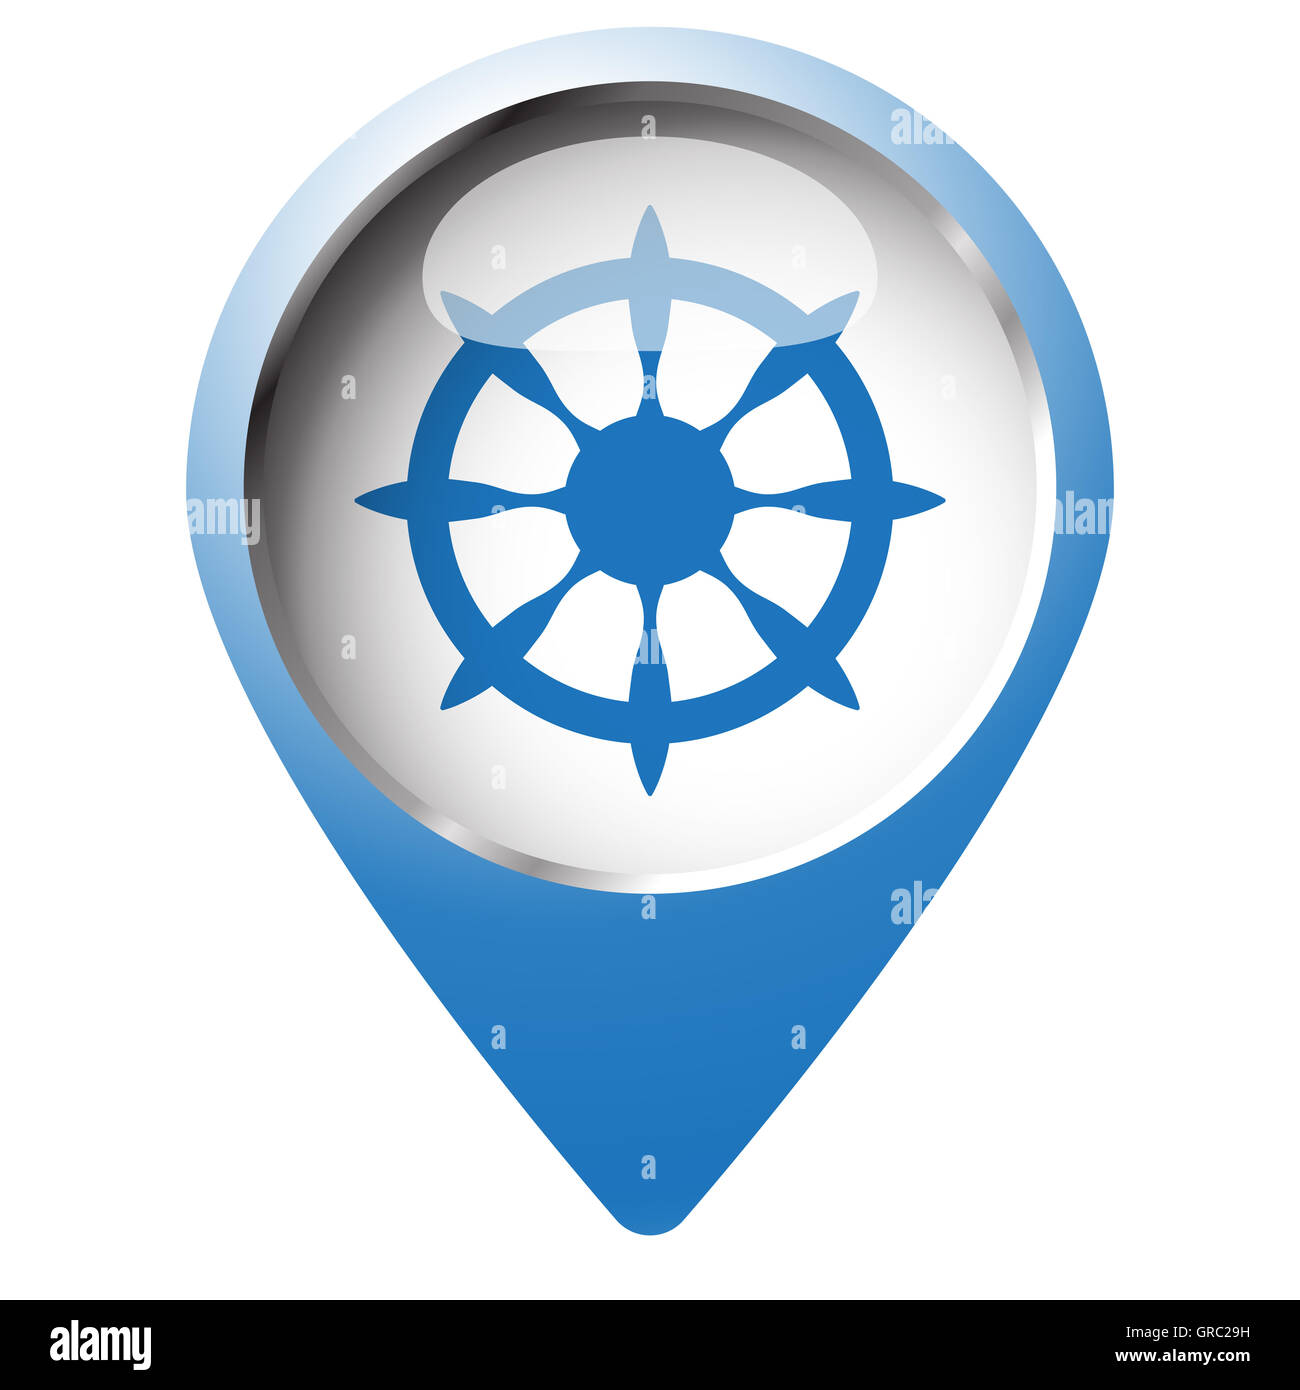 Map pin symbol with Boat Wheel icon. Blue symbol on white background. Stock Photo